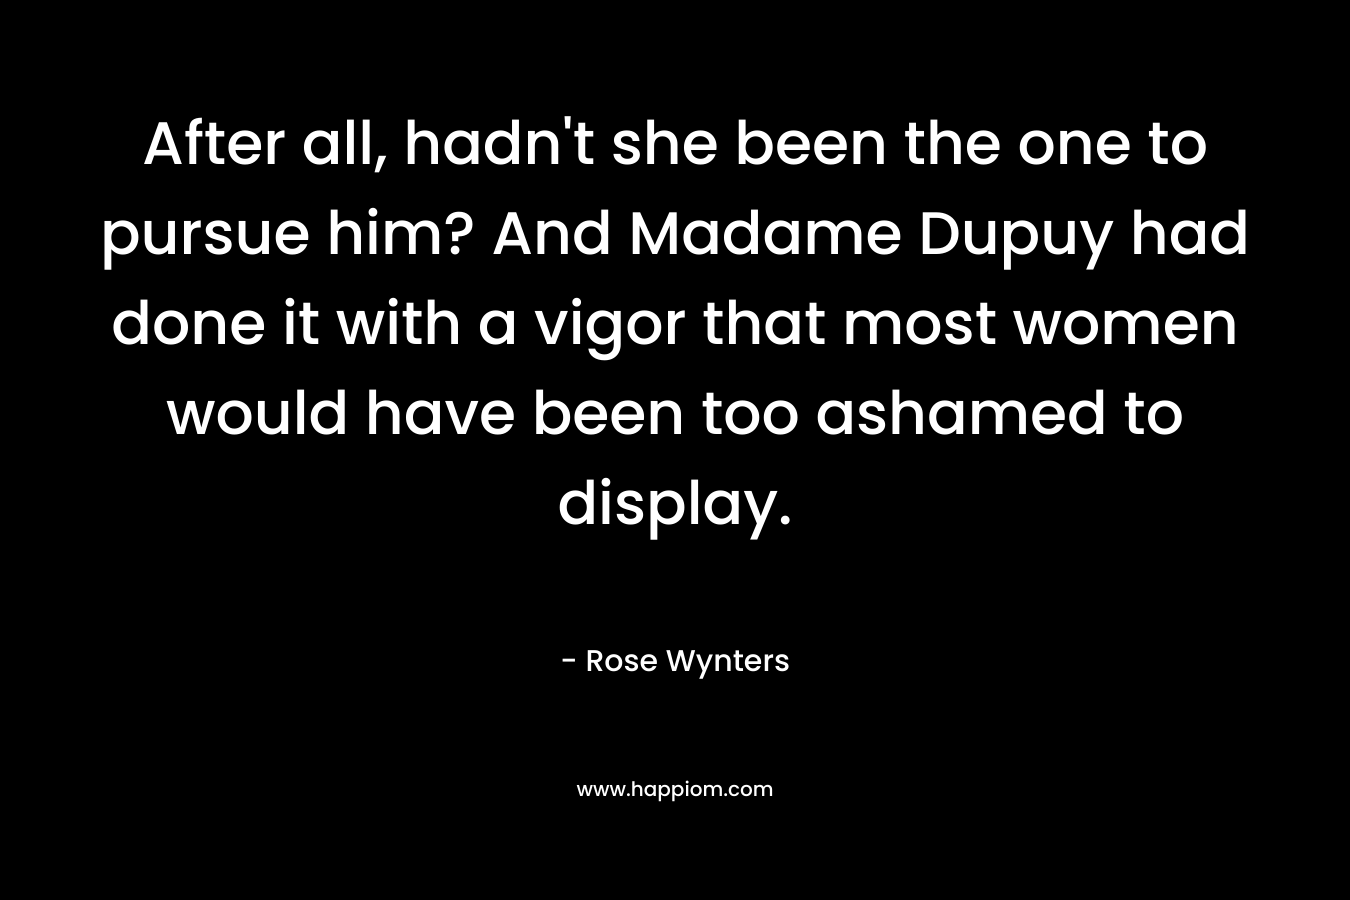 After all, hadn't she been the one to pursue him? And Madame Dupuy had done it with a vigor that most women would have been too ashamed to display.